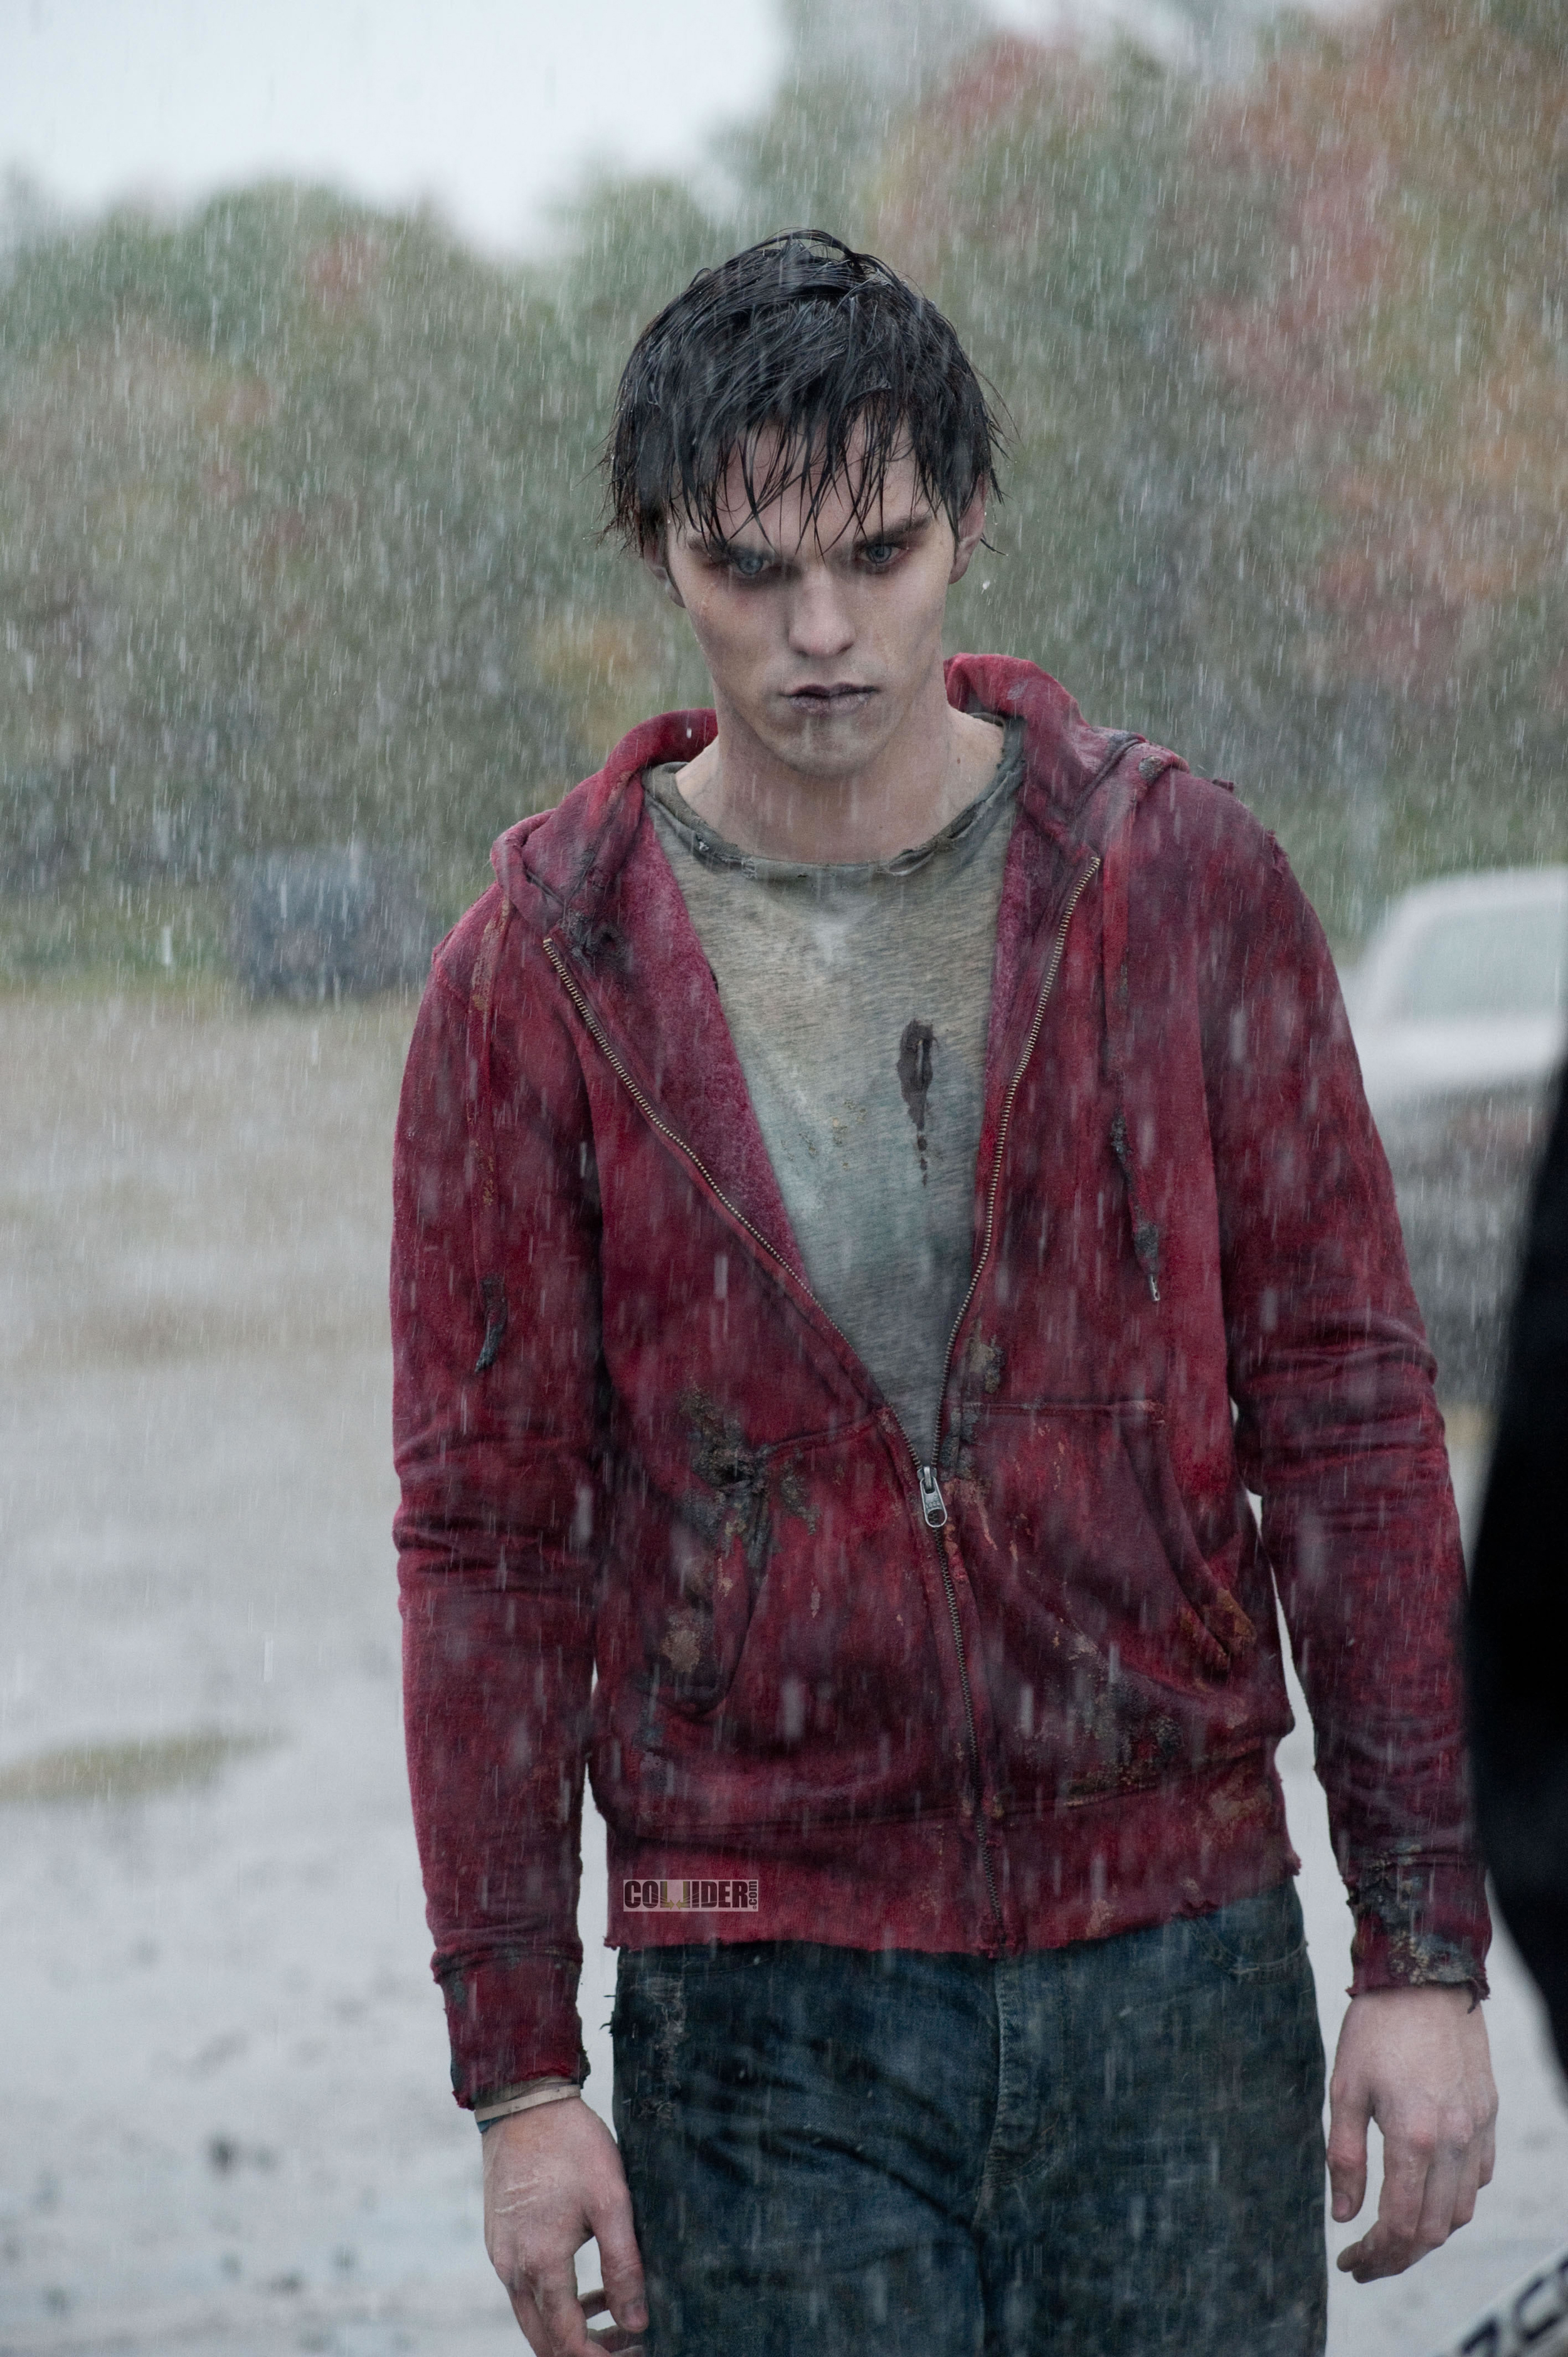 Amazing Warm Bodies Pictures & Backgrounds